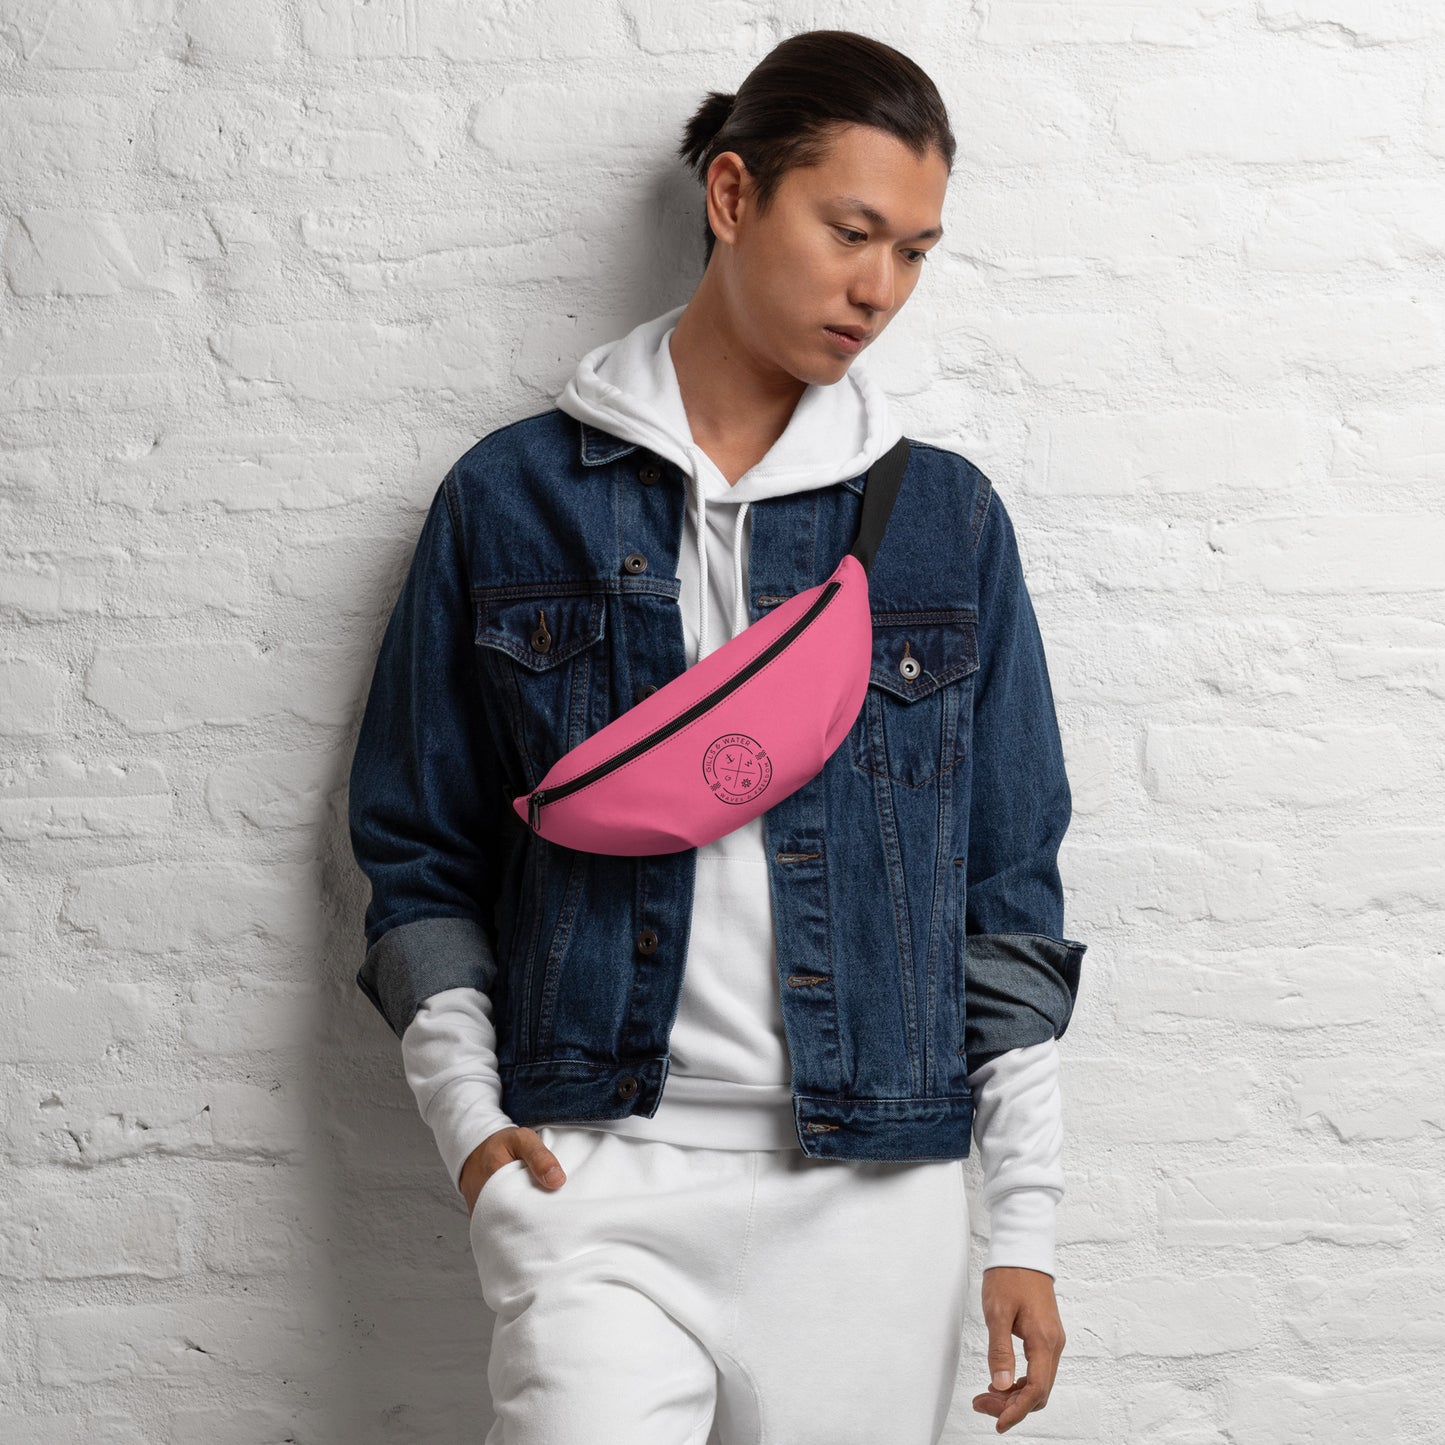 AquaSling: Gills and Water Brand Brink Pink Fanny Pack